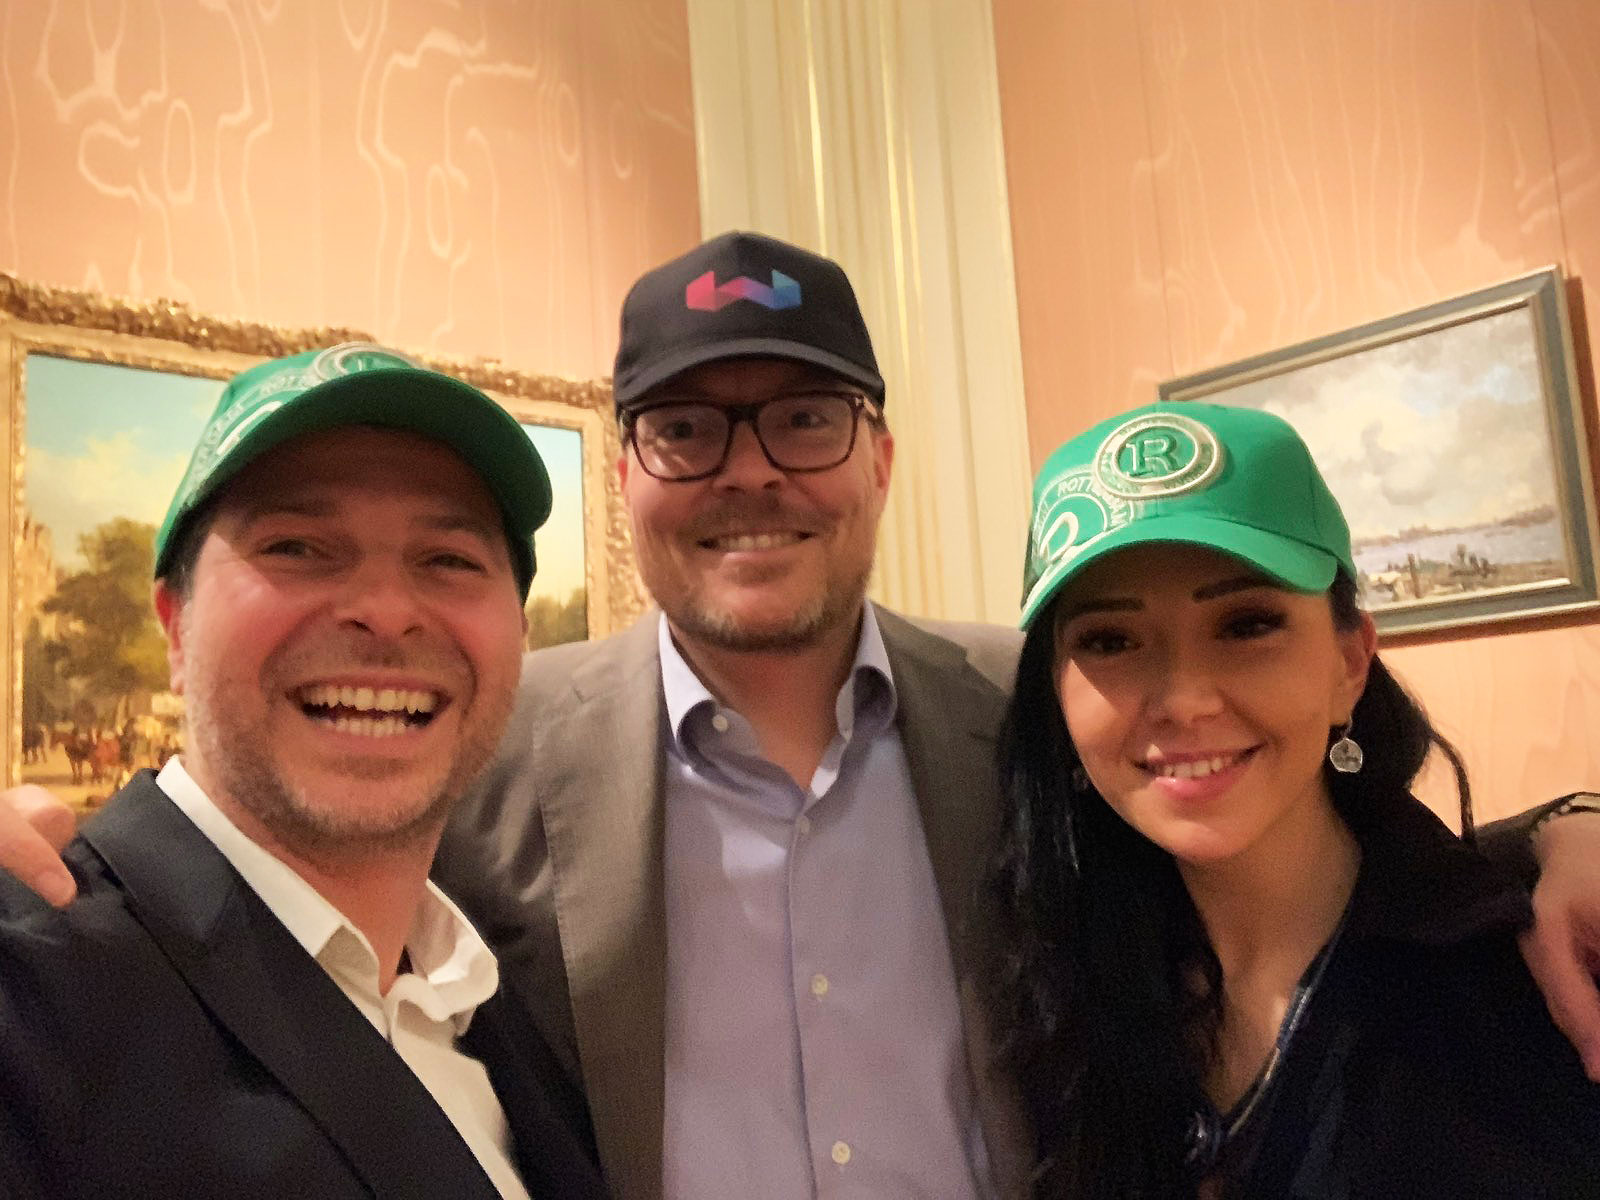 Plamen Russev with Prince Constantijn of the Netherlands and Aniela Russeva at the municipality of Rotterdam evaluating  the city application for a host city of Webit.